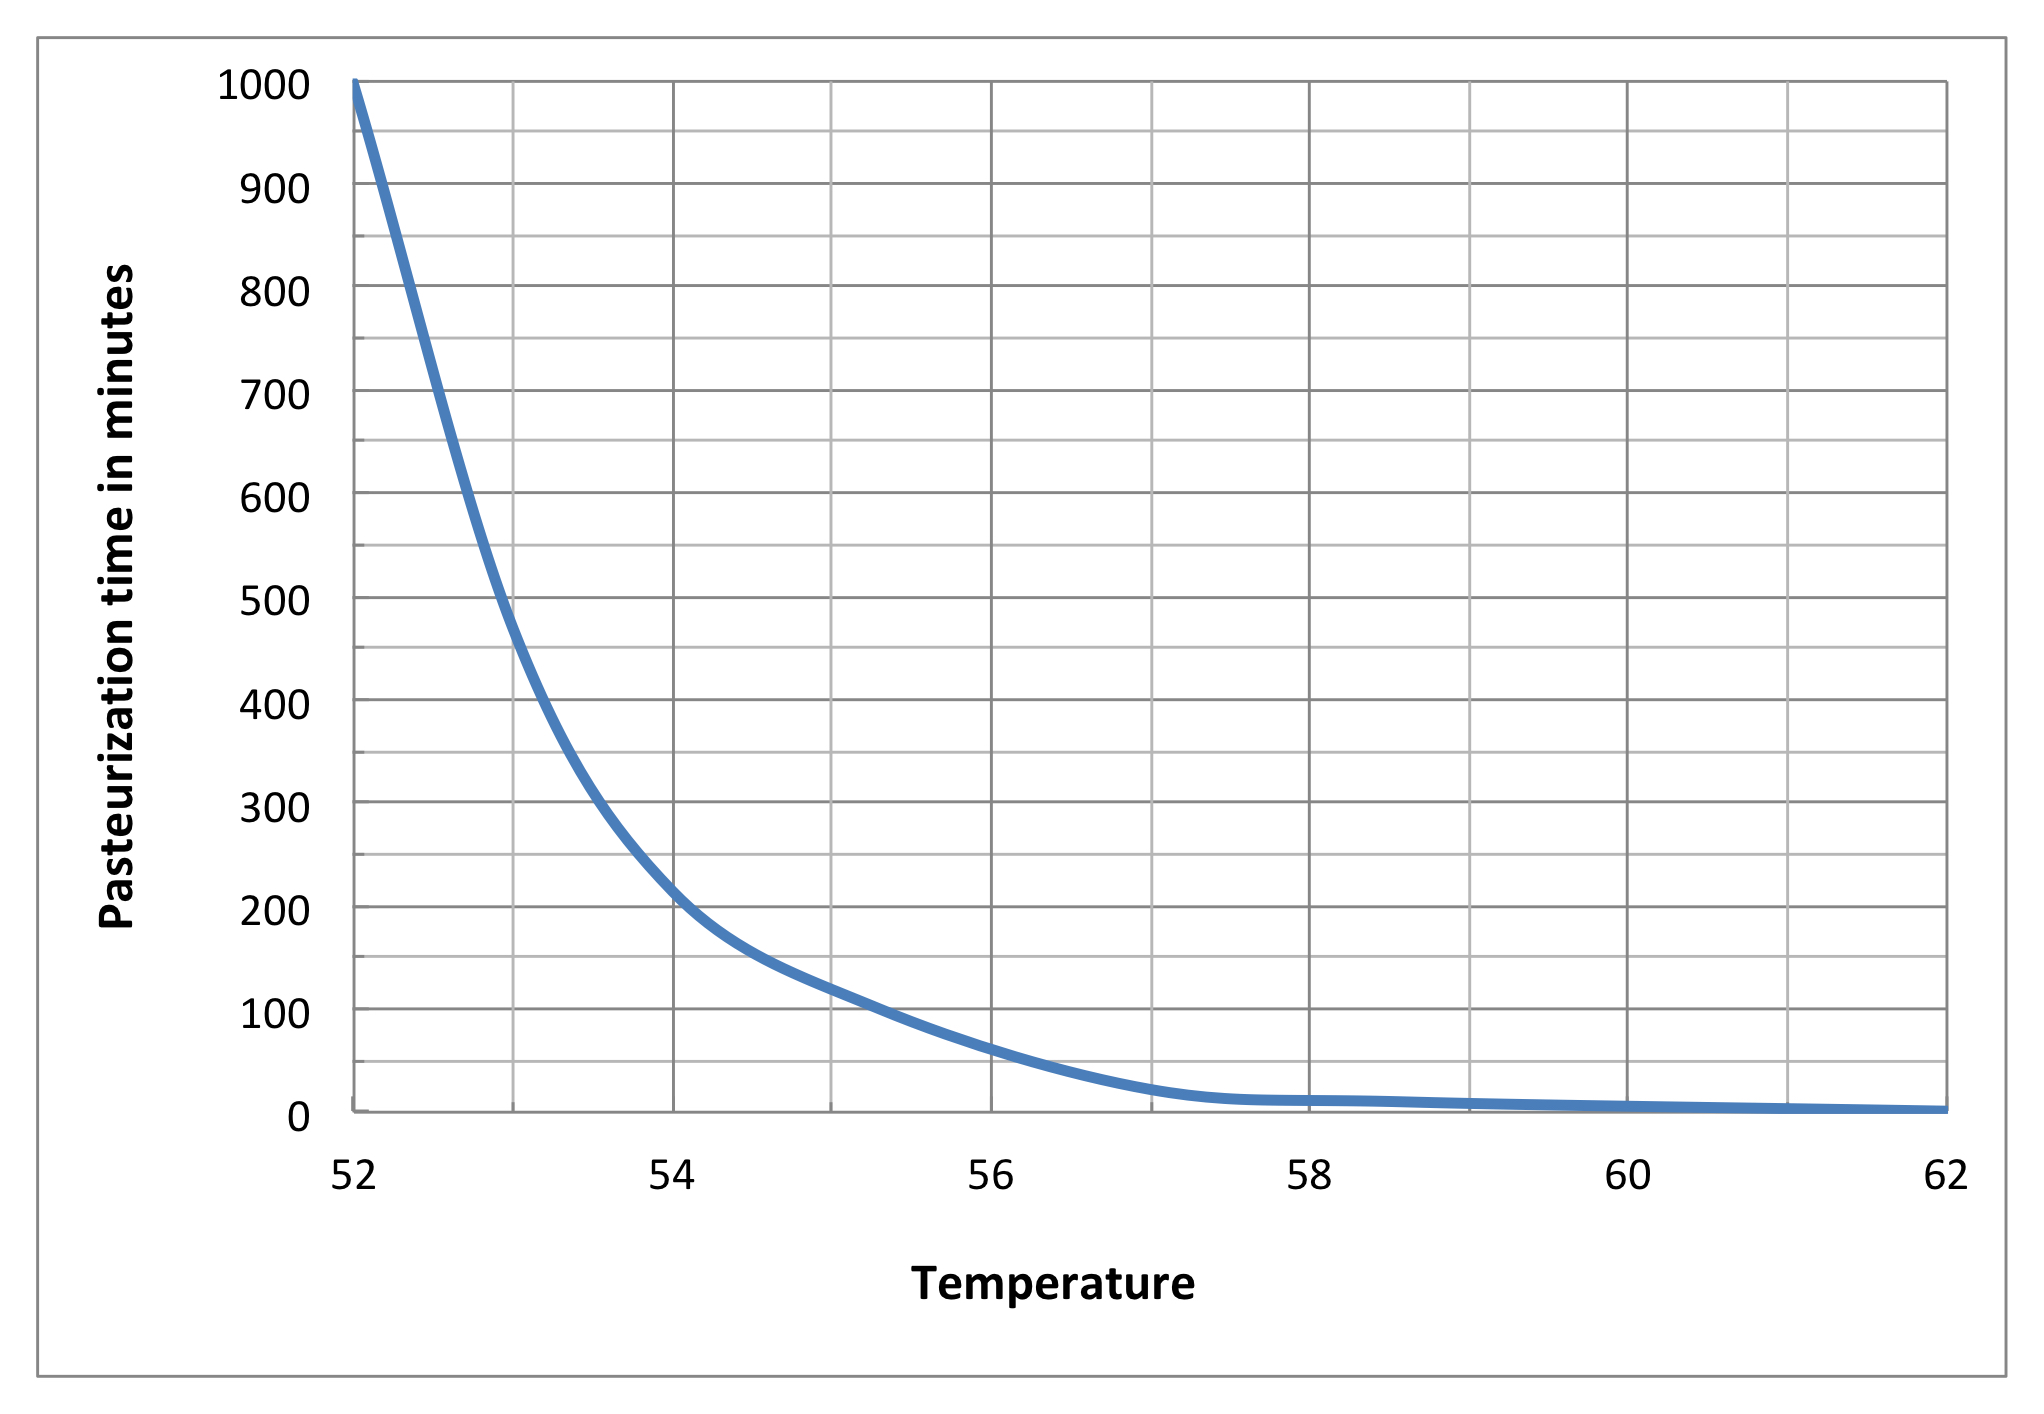 pasteurization time and temperature chart